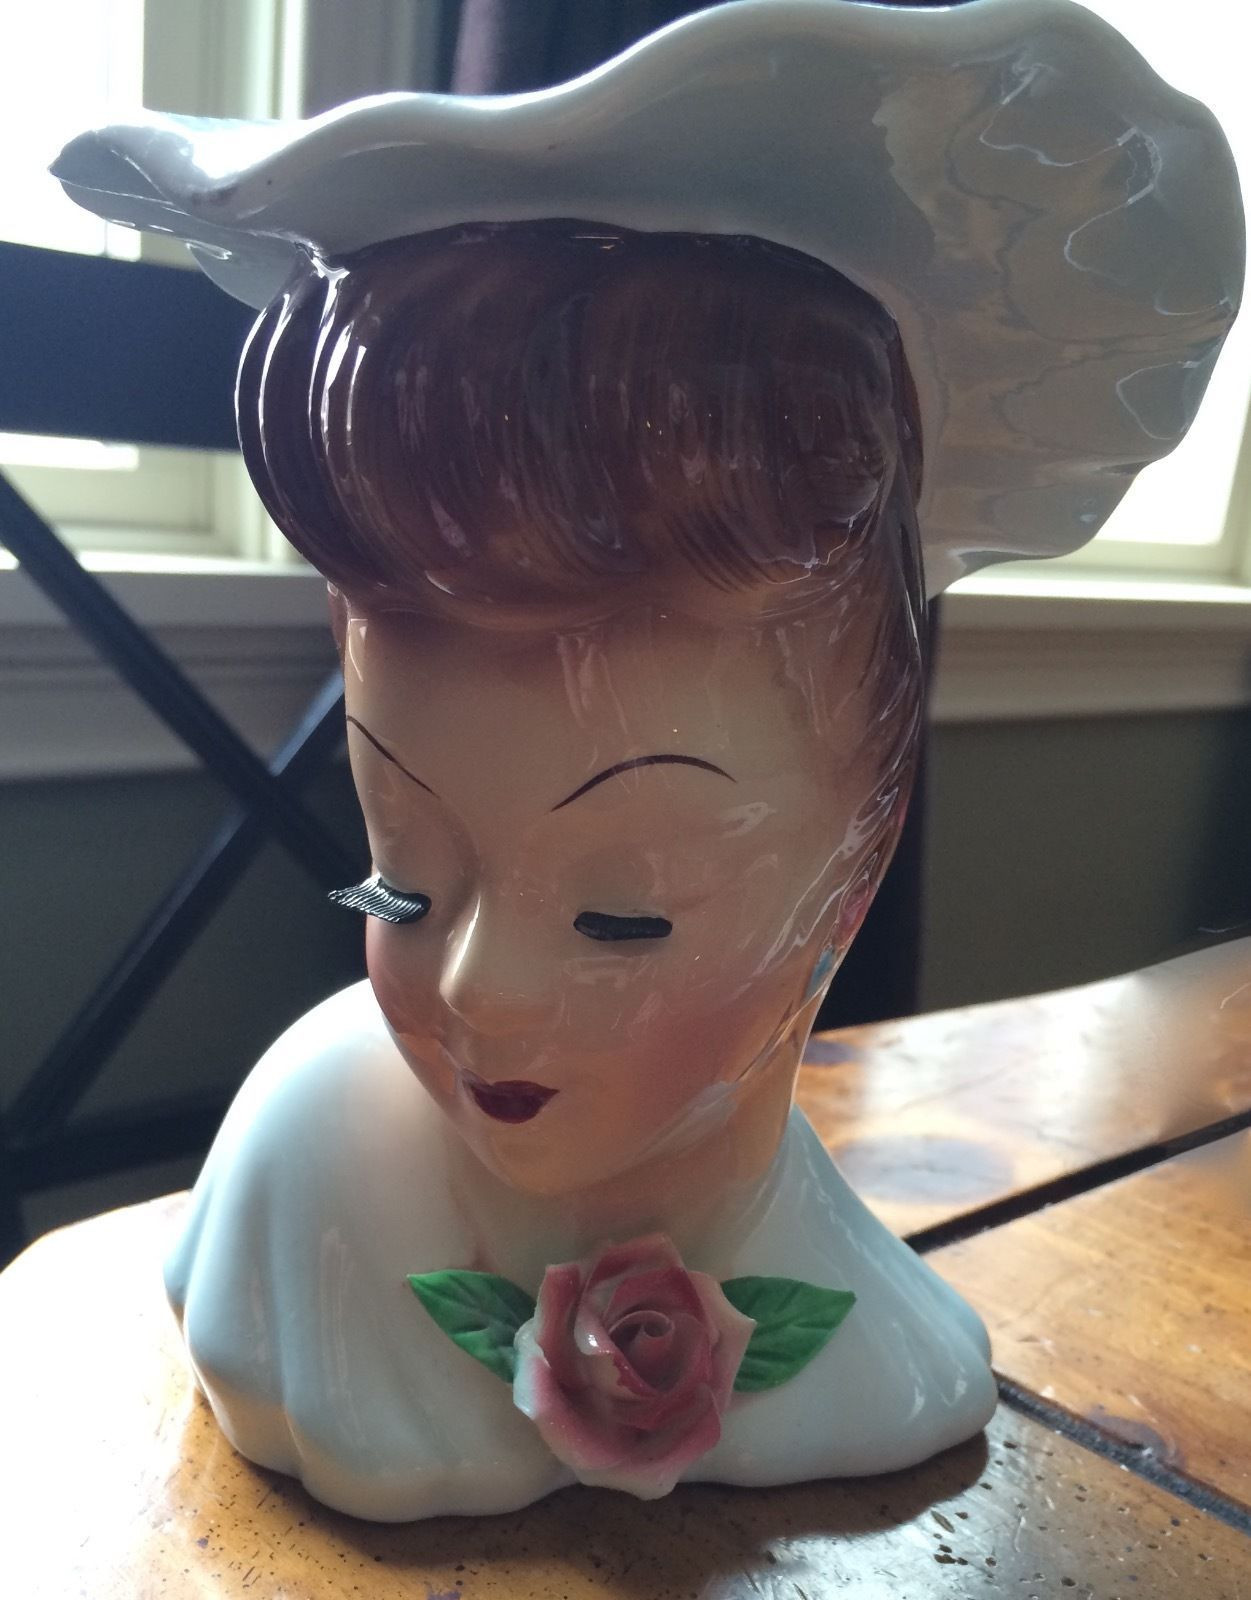 inarco lady head vase of lefton lady hat head vase planter 2666 ladies hats planters and in lefton lady hat head vase planter 2666